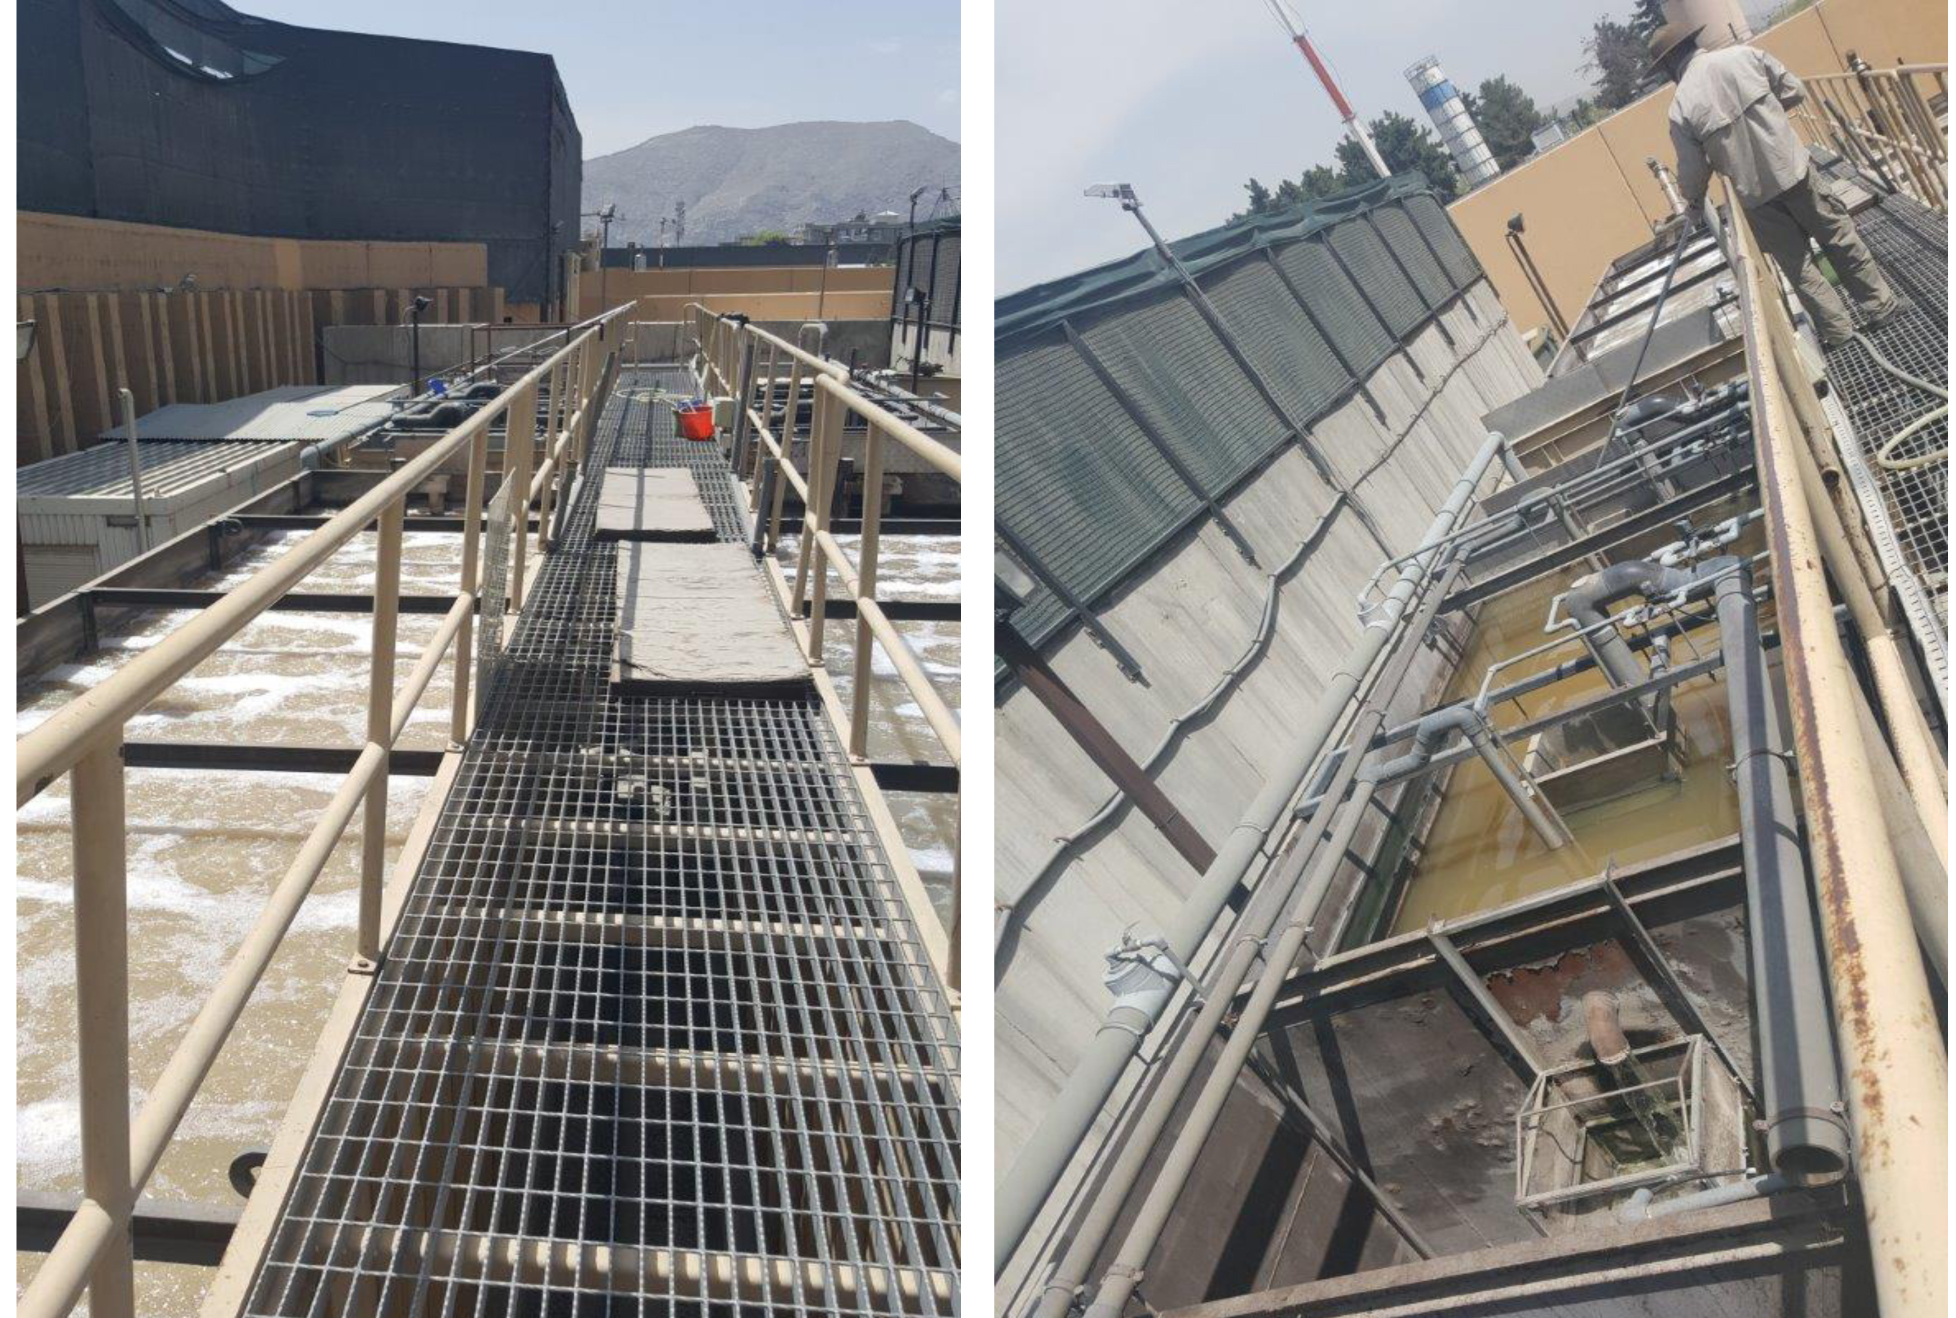 Survey and Design of Refurbishment of WWTP at NATO HQ RS, Kabul, Afghanistan